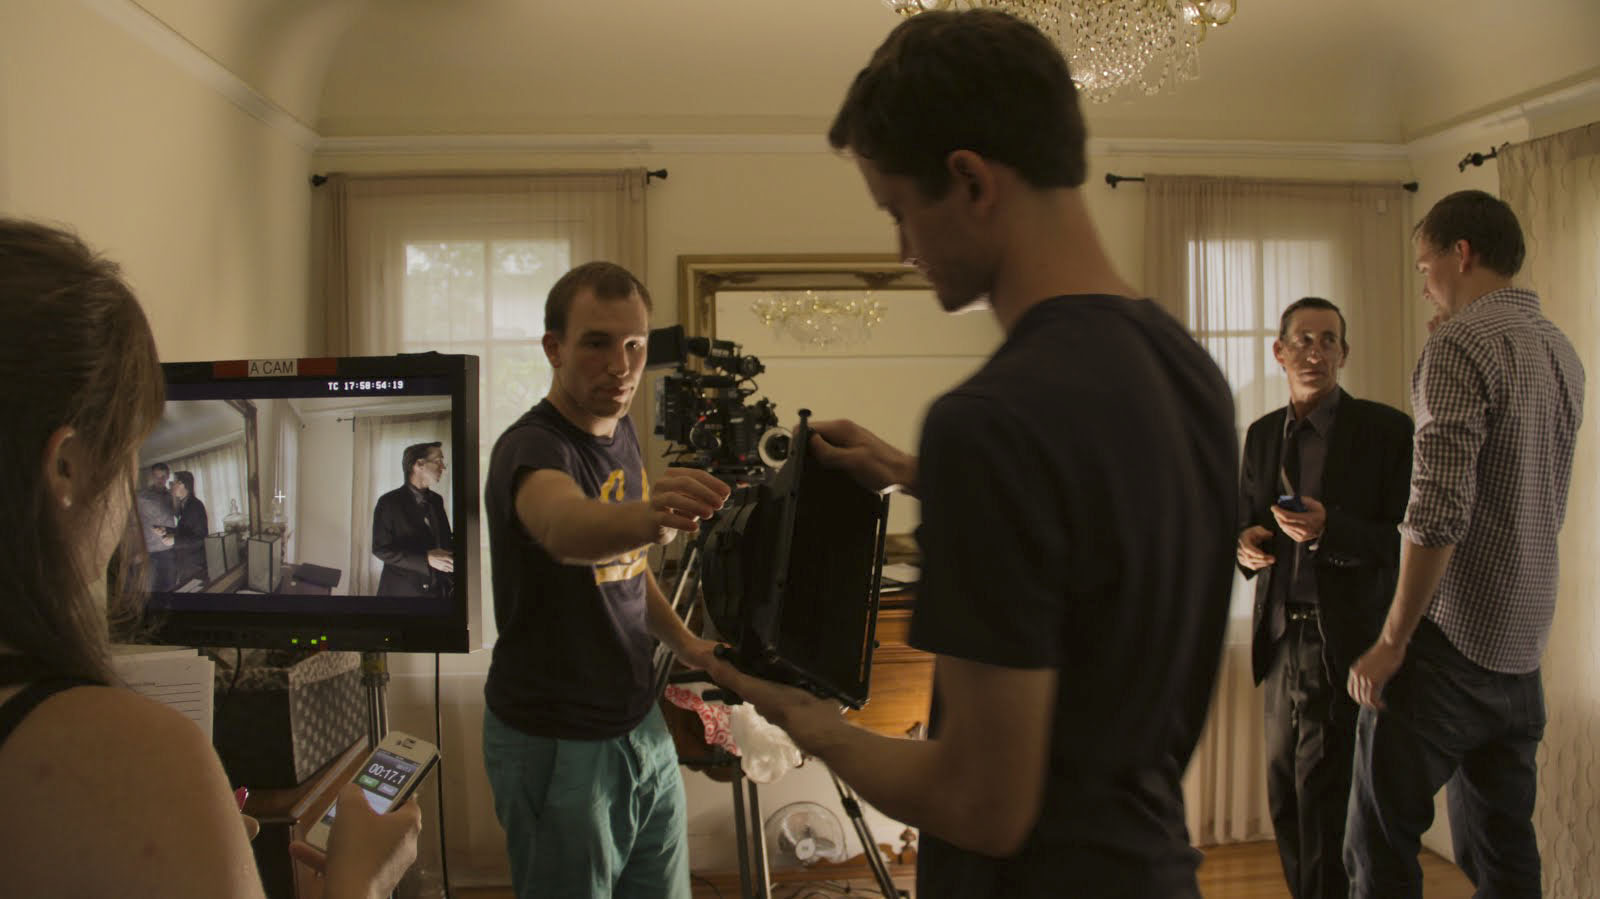 On the left, Tobias Deml and assistant cameraman Nathan Francis pass the matte box to assemble the camera, while on the right, actor Jimmy McFinn and David Leidy discuss the scene.